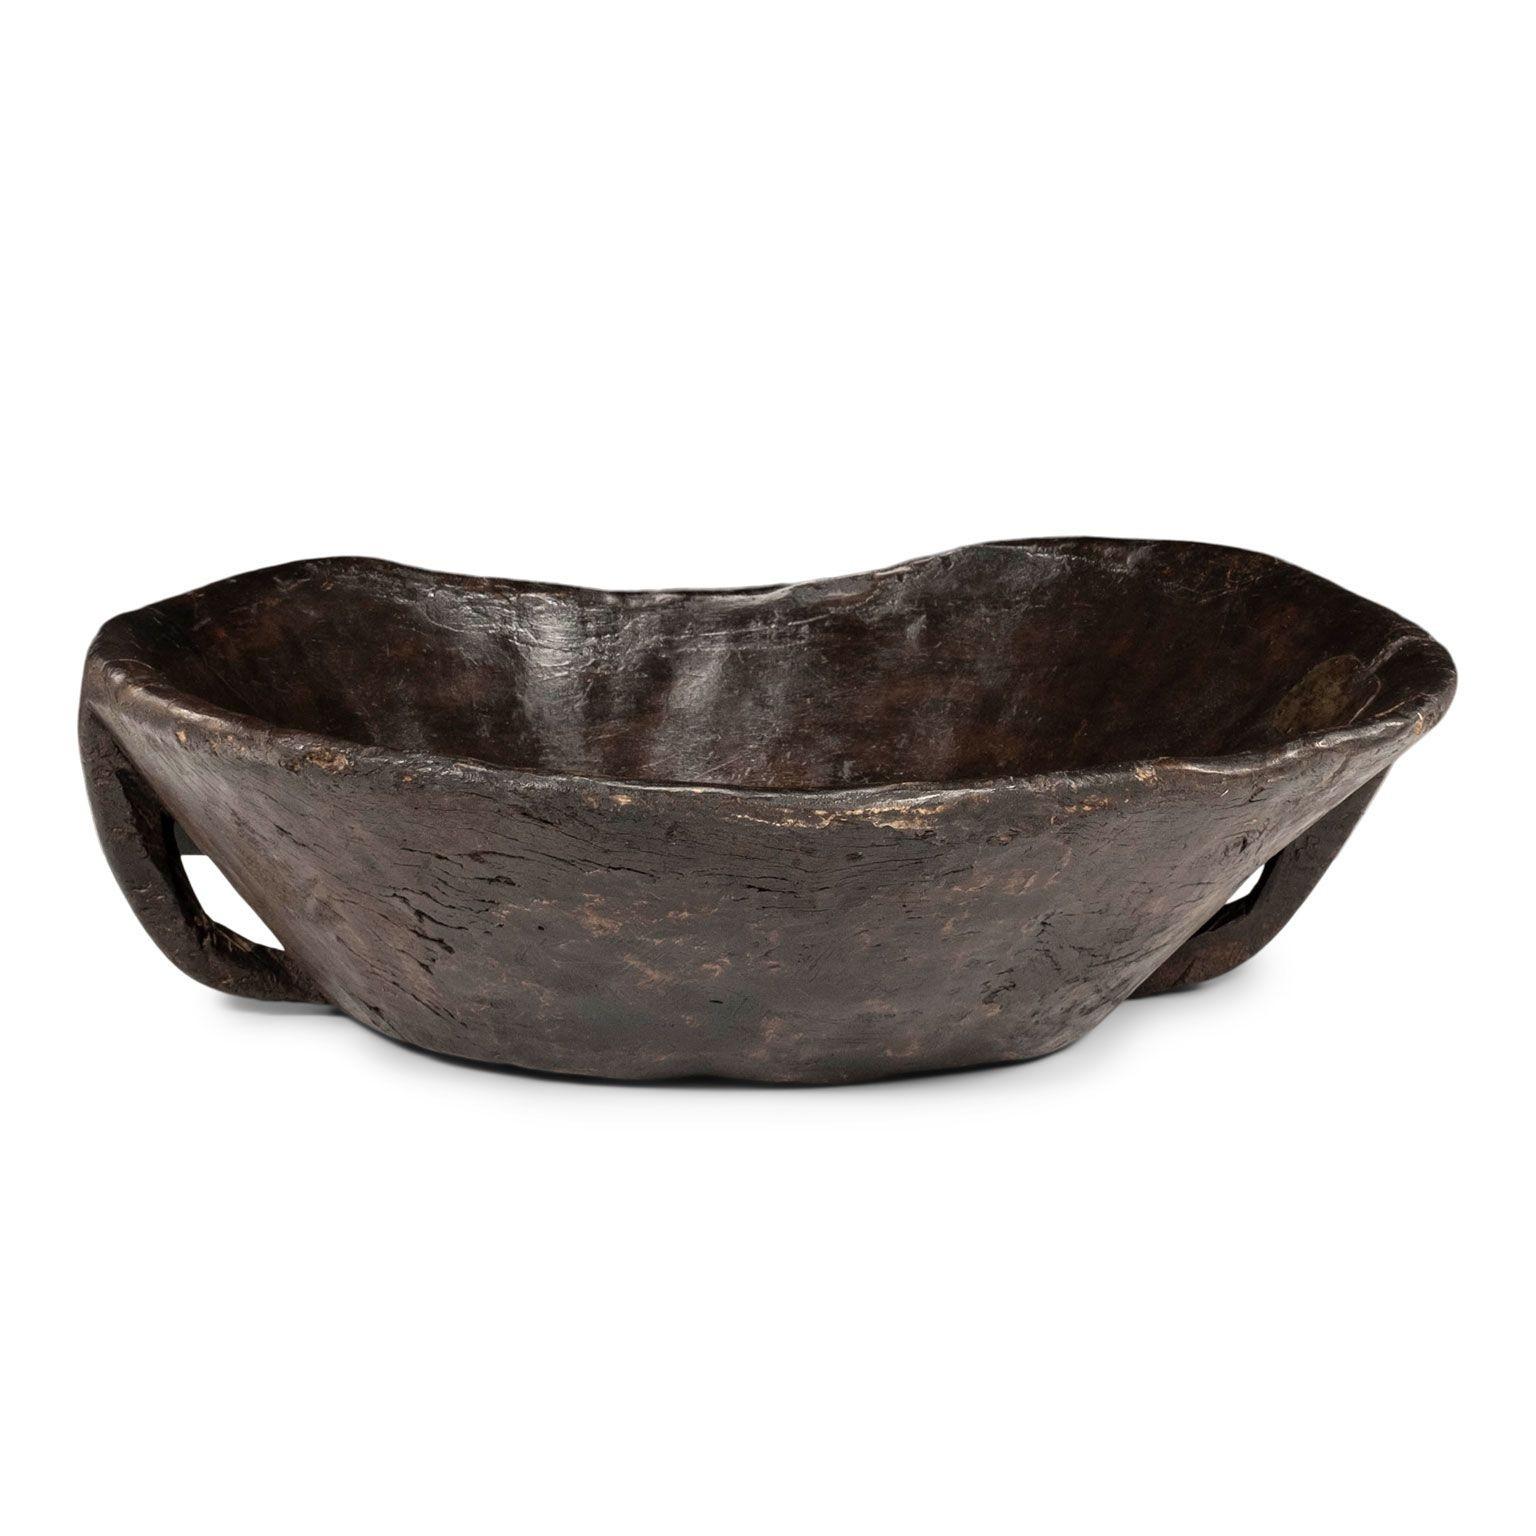 Large primitive bowl hand-carved from hardwood. Two handles. Iron patch repair.

Note: Original/early finish on antique and vintage metal will include some, or all, of the following: patina, scaling, light rust, discoloration, and corrosion. Due to